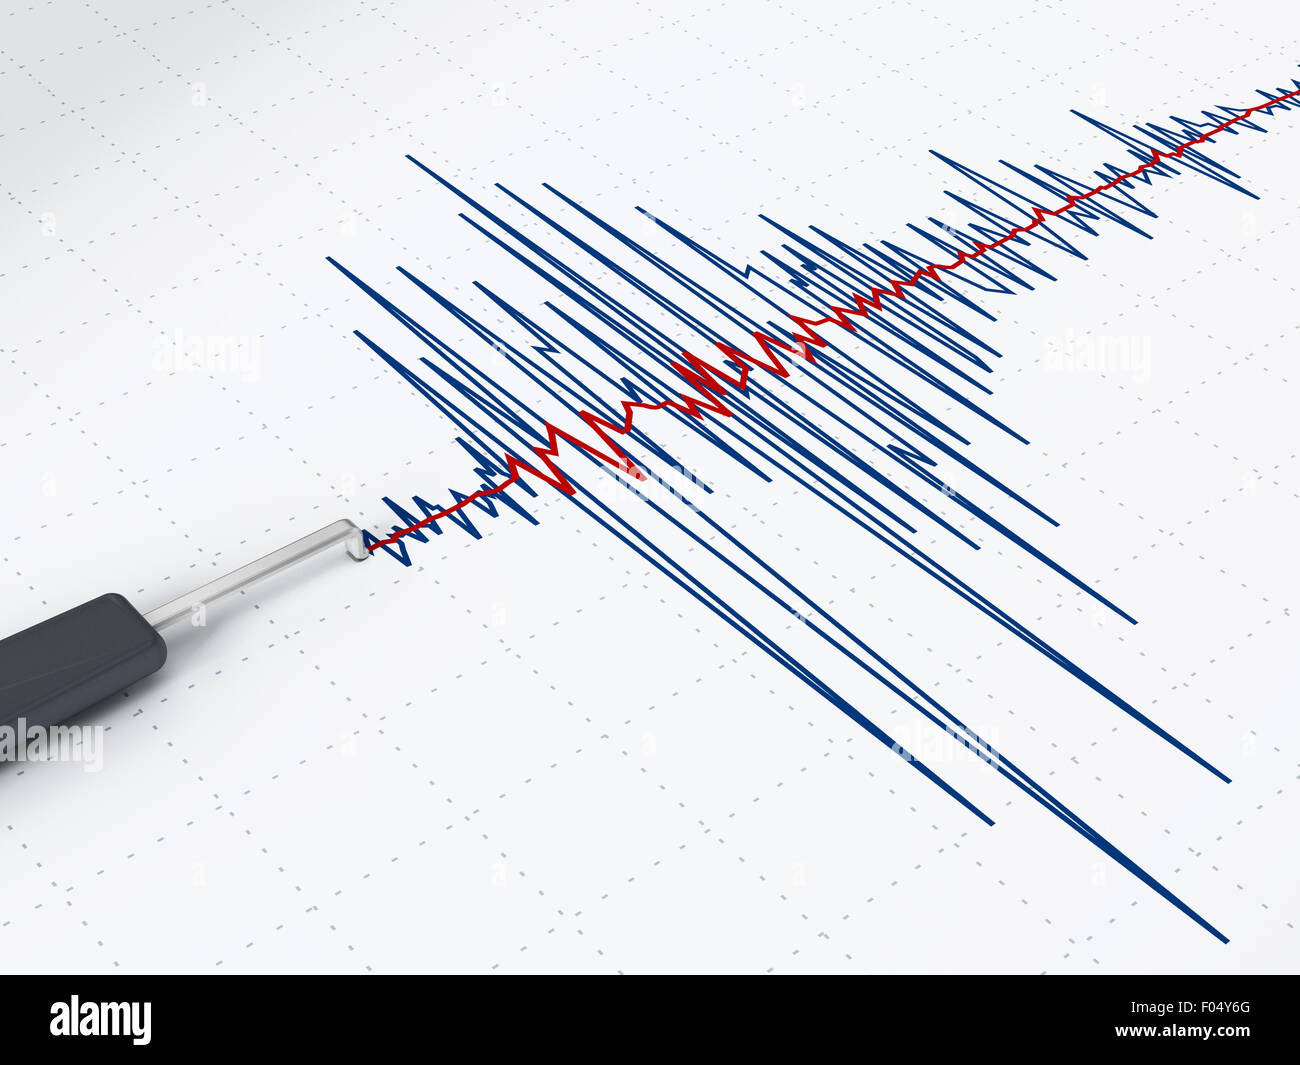 Seismic activity graph showing an earthquake. Stock Photo